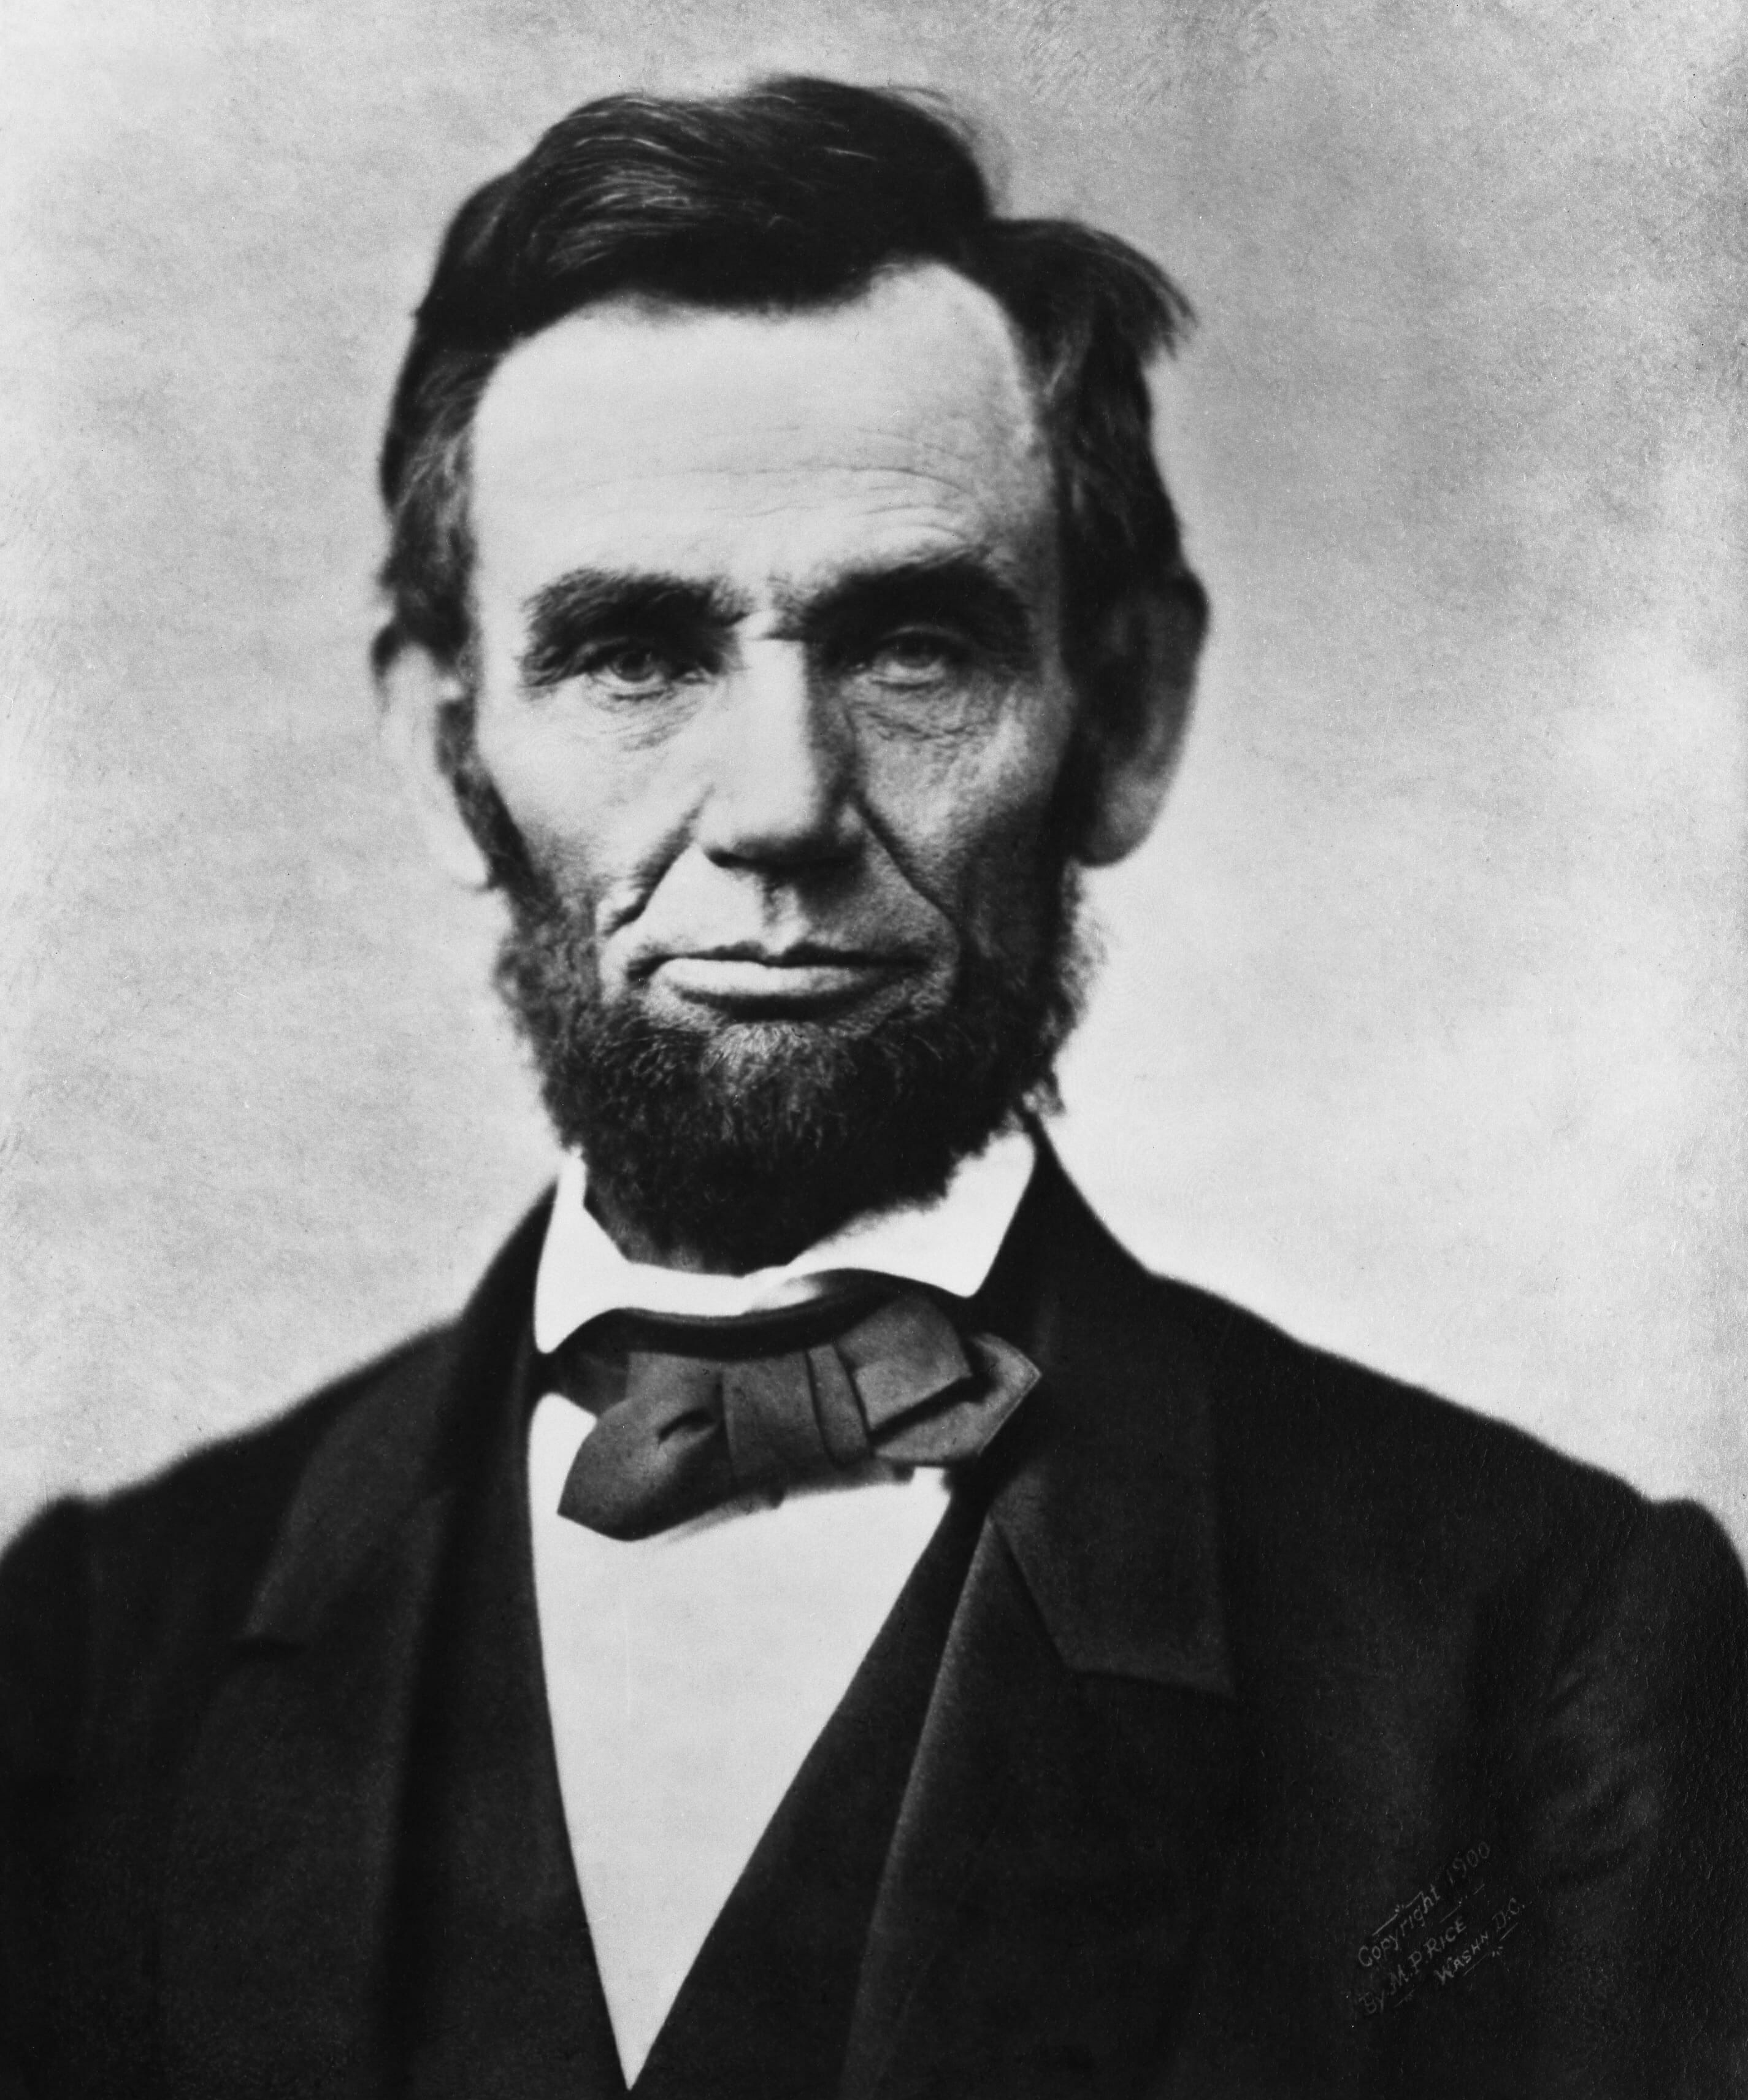 Bow tie origins: Abraham Lincoln with a bow tie